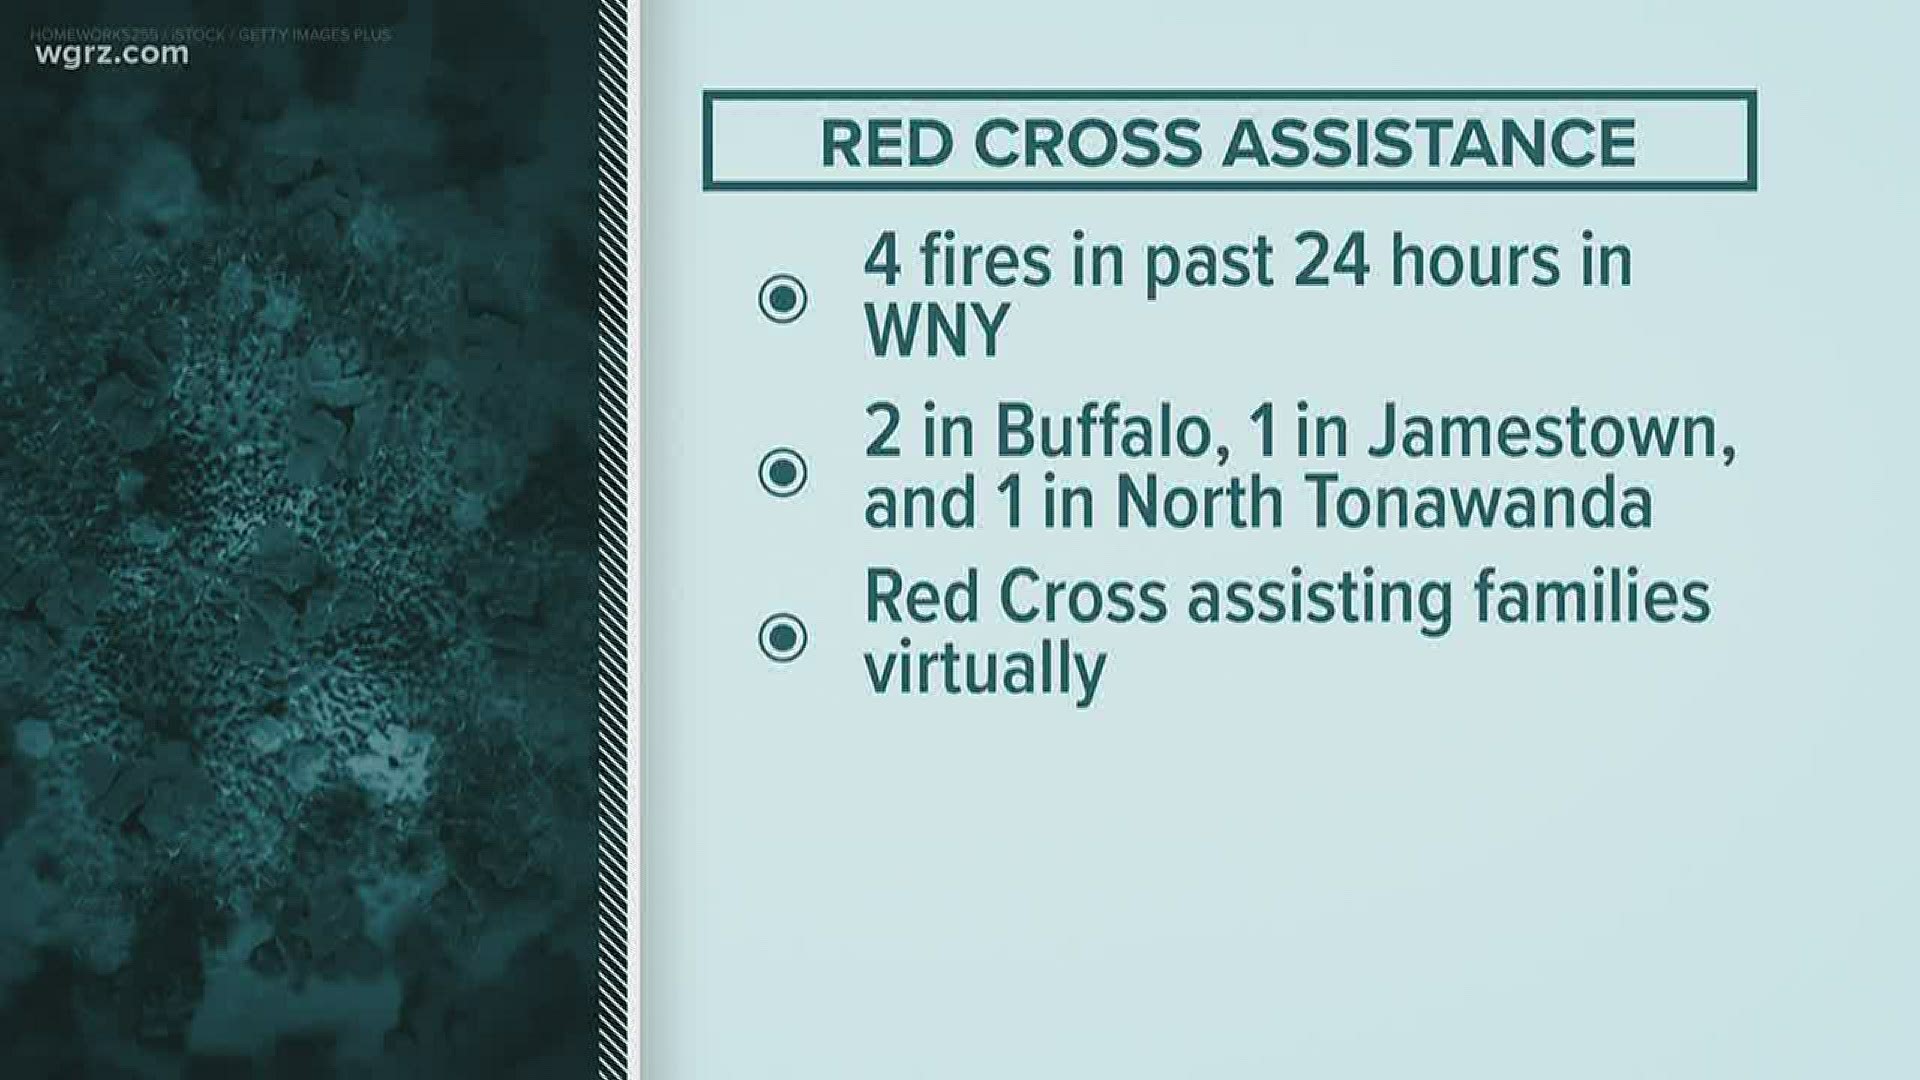 Red Cross volunteers have been virtually speaking with victims to help determine their needs.